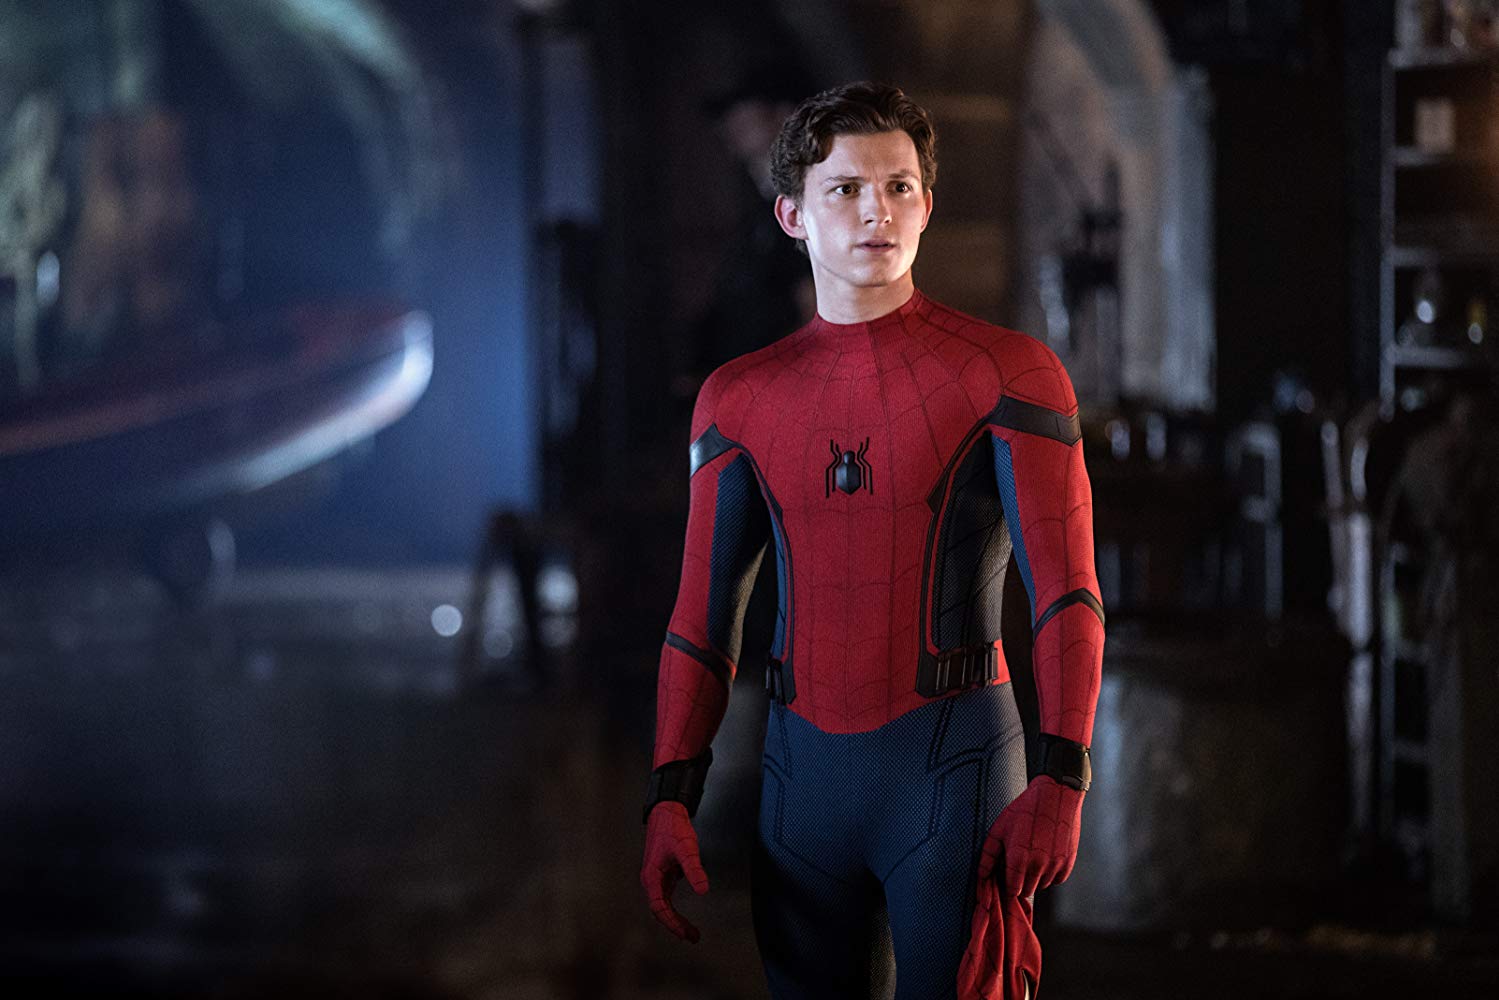 Sony and Disney break up, ending Marvel's involvement in Spider-Man movies